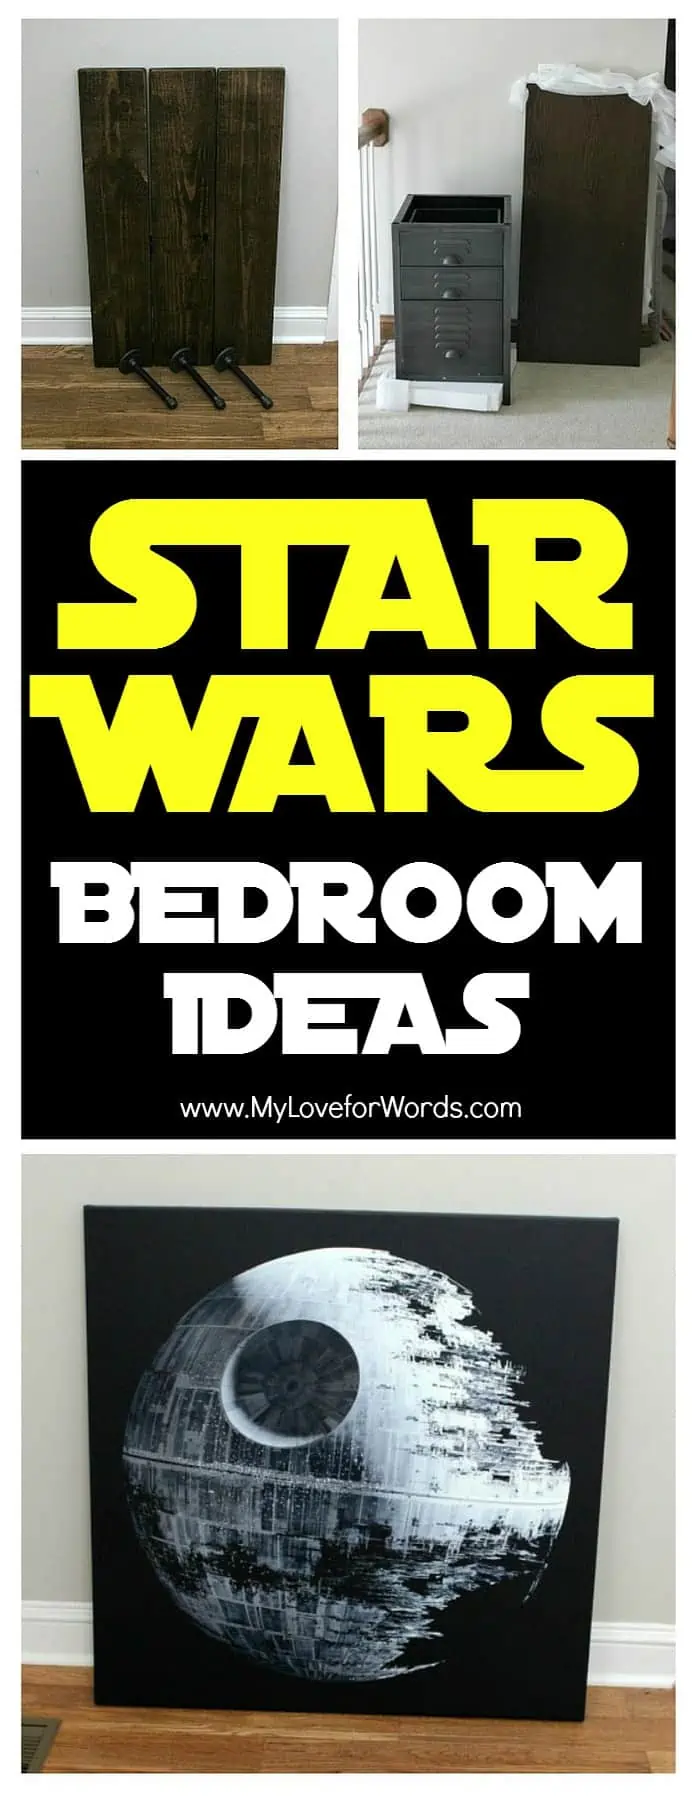 Creating a bedroom design plan for a teenage boy isn't easy. They aren't quite grown up, but they aren't little anymore either. I tried to create a good balance between his current interests and versatile pieces that can stand the test of time. I hope he loves his new Star Wars bedroom surprise makeover!